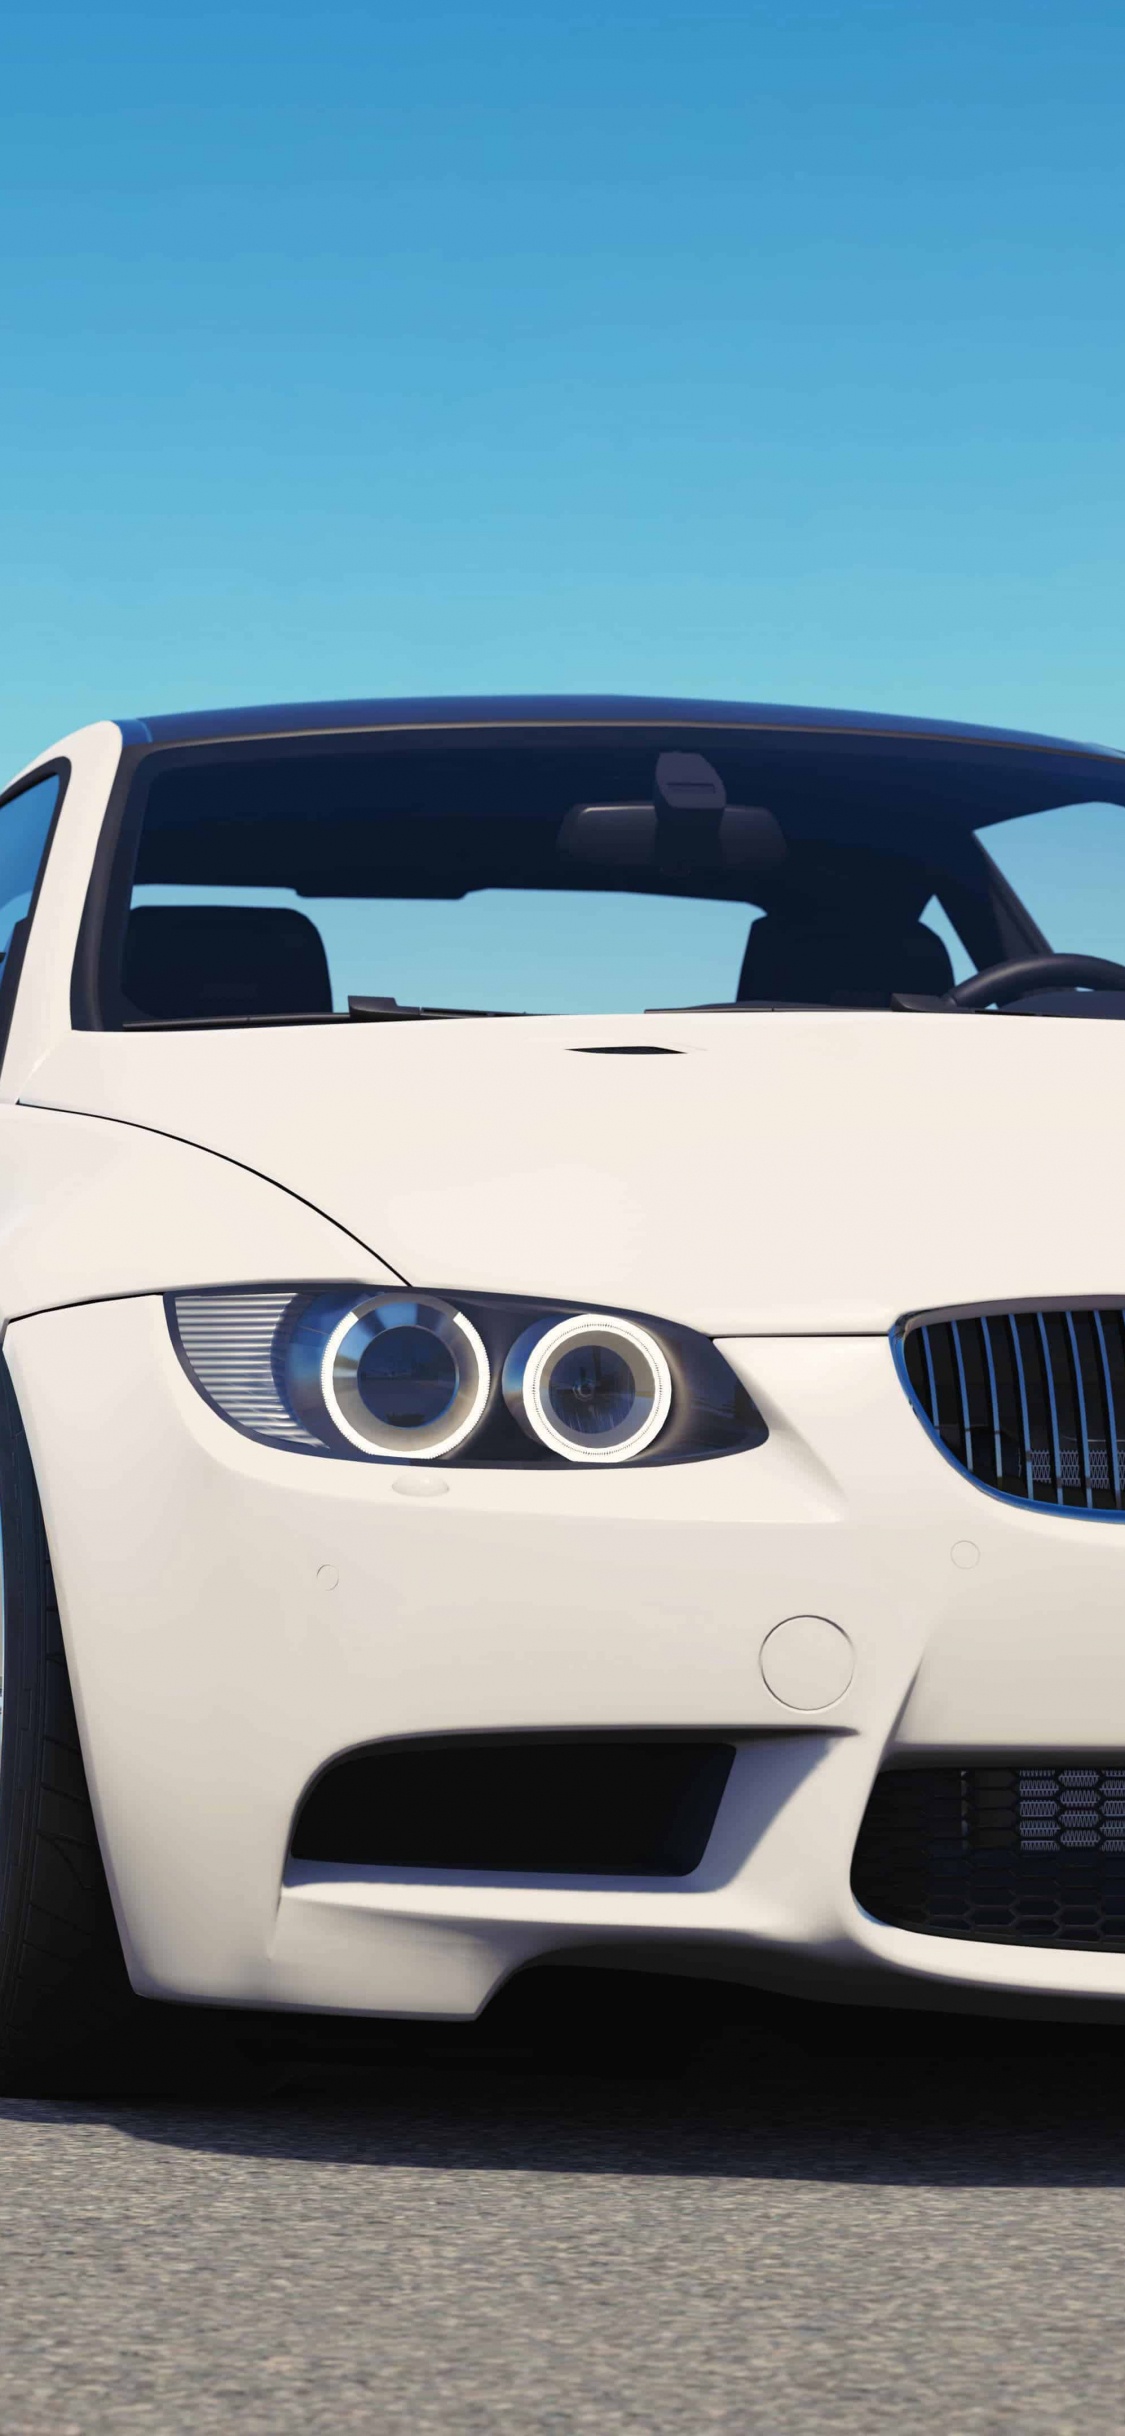 White Bmw m 3 Coupe Parked on Gray Asphalt Road During Daytime. Wallpaper in 1125x2436 Resolution